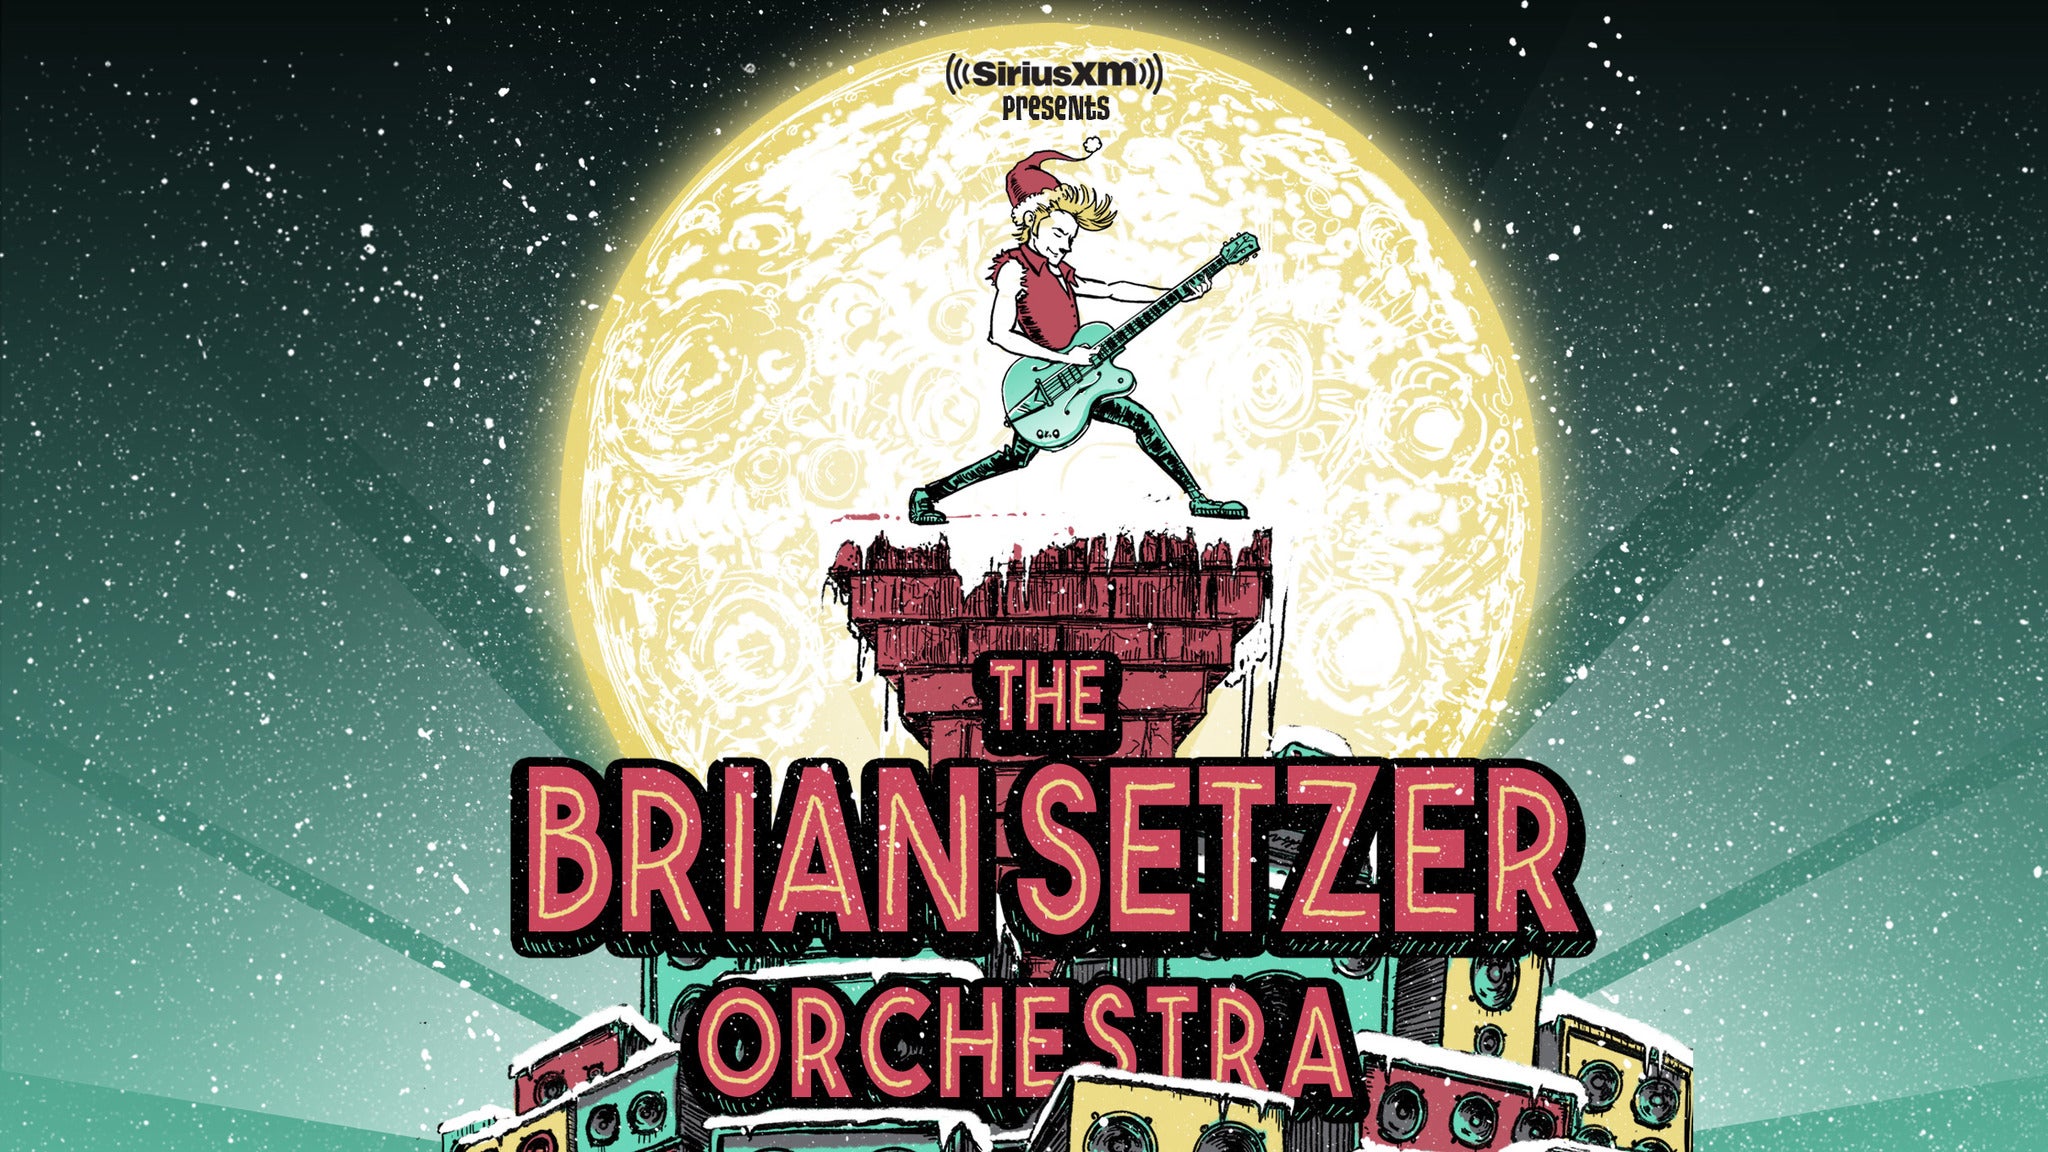 The Brian Setzer Orchestra's 16th Annual Christmas Rocks! Tour in Washington promo photo for Fan Club presale offer code